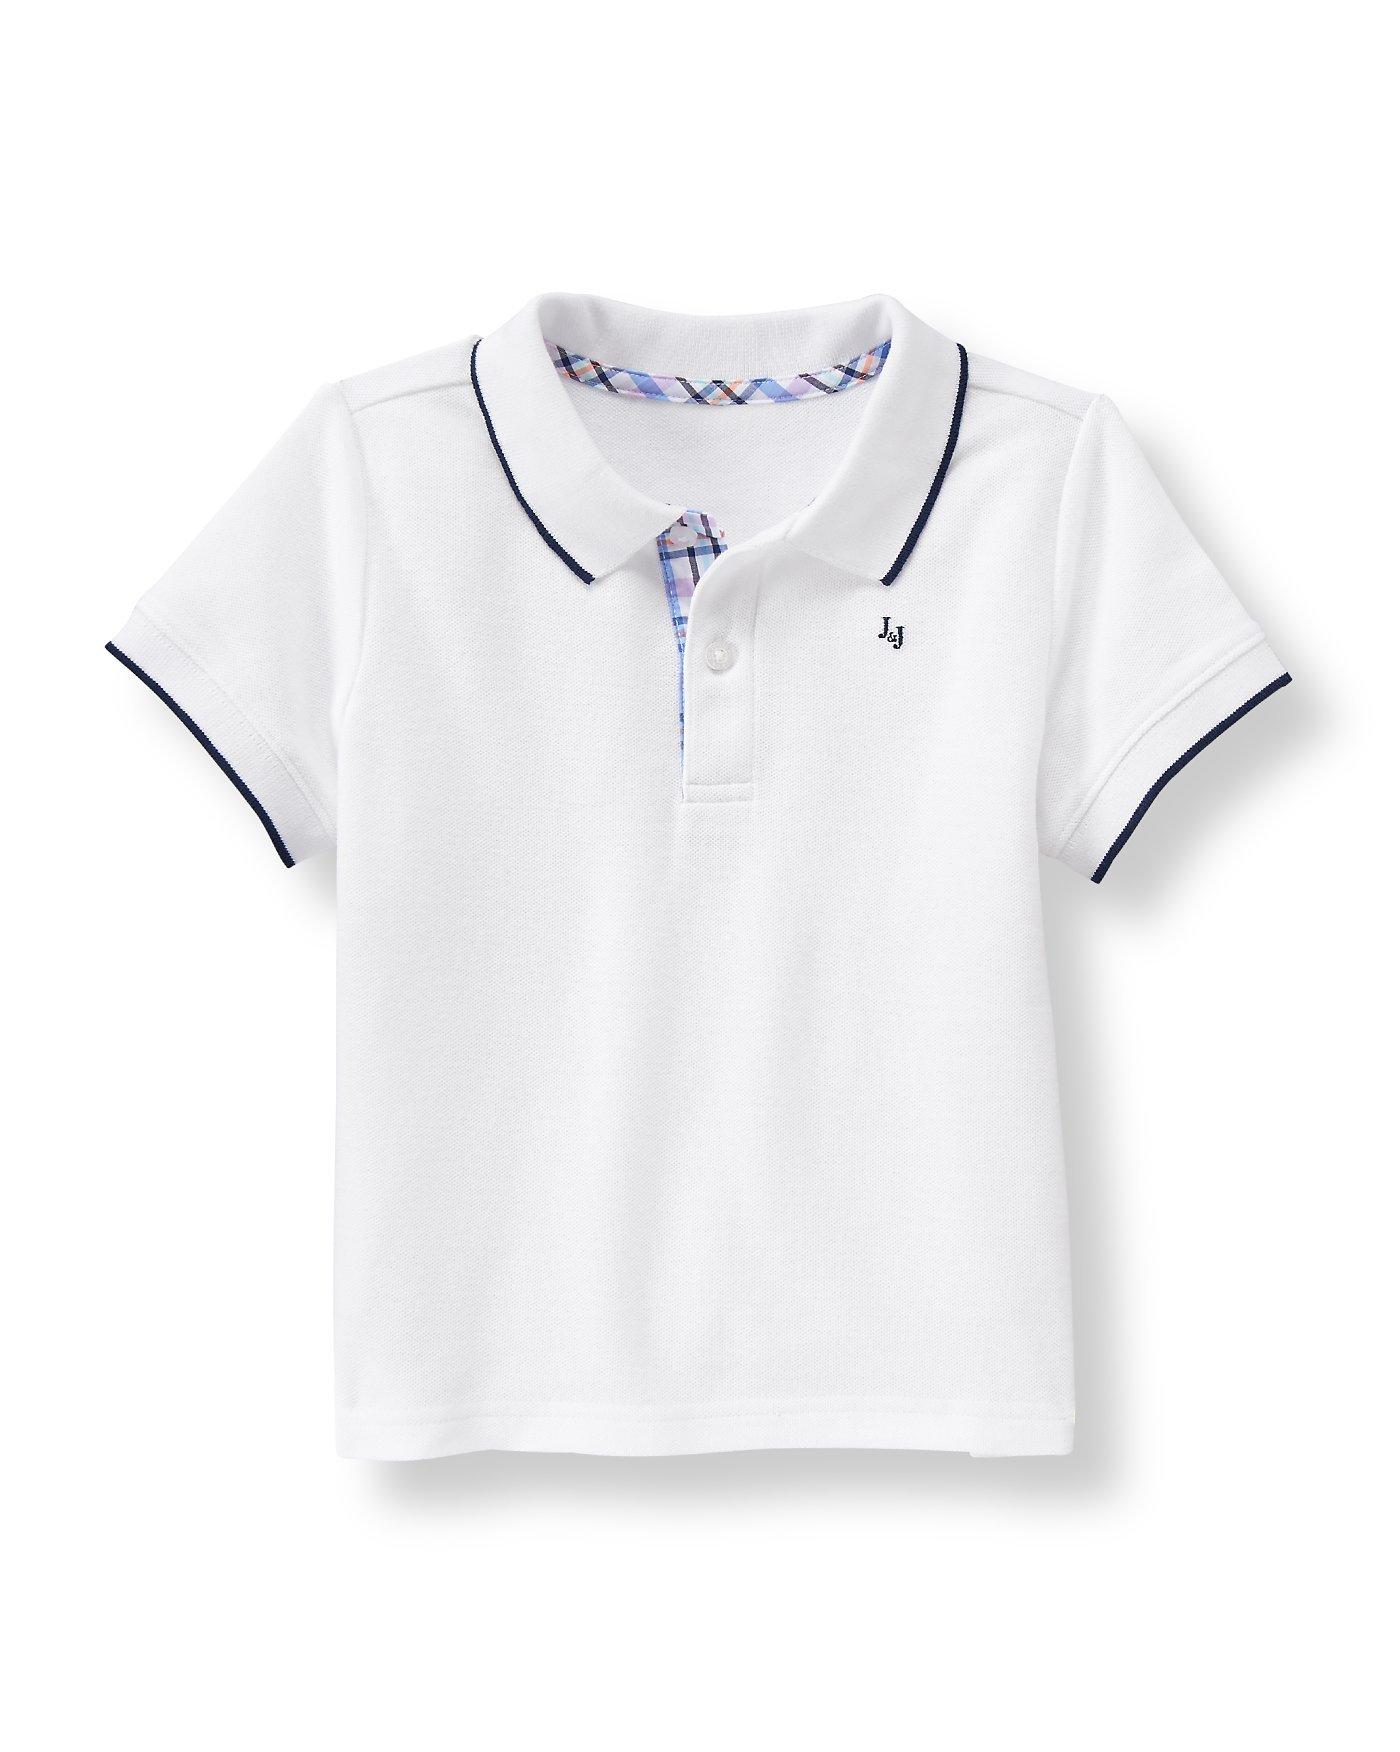 Boy White Pique Polo Shirt by Janie and Jack